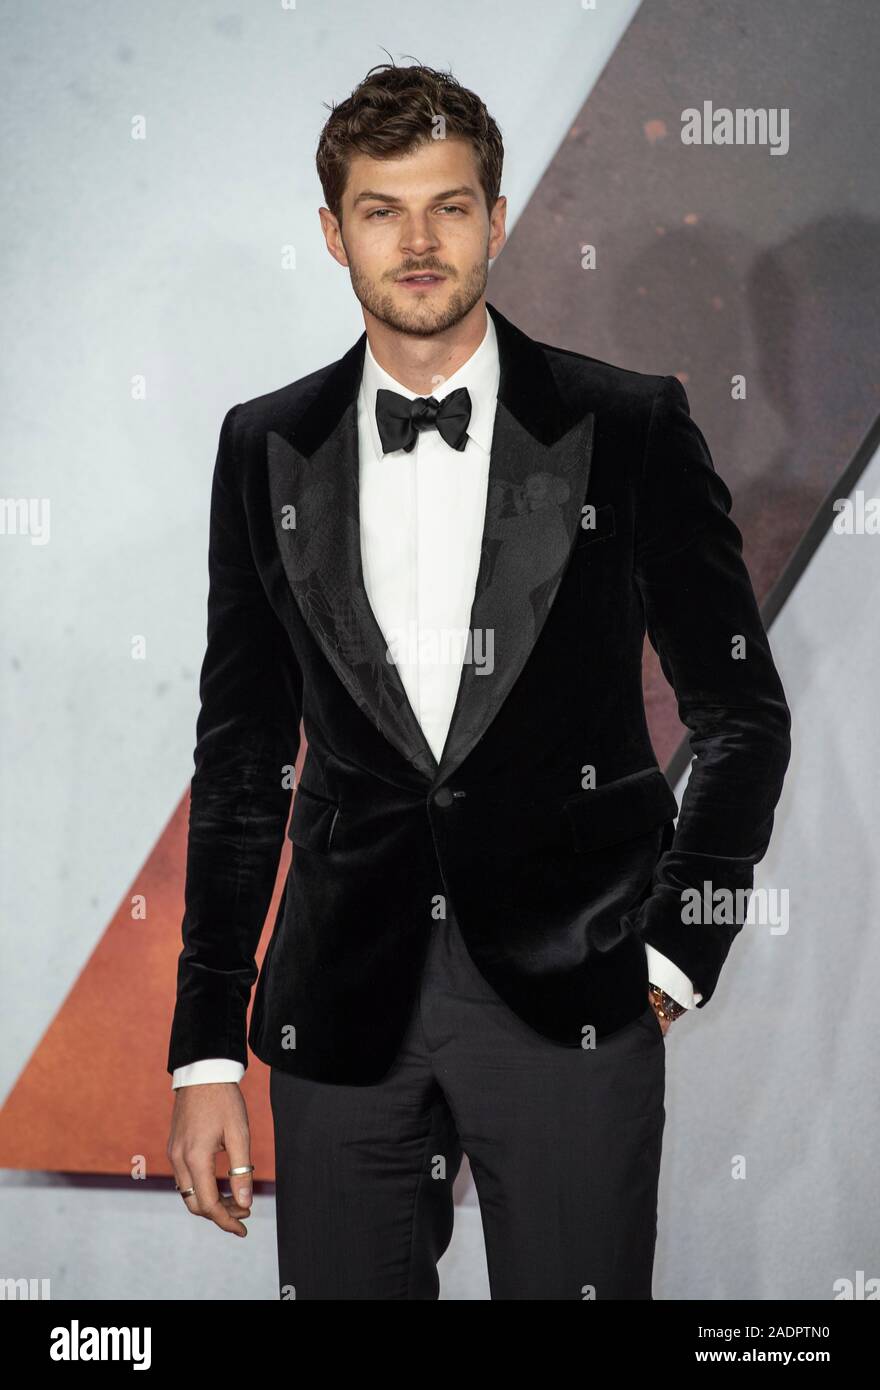 London, UK. 04th Dec, 2019. LONDON, ENGLAND - DECEMBER 04: Jim Chapman attends the World Premiere and Royal Performance of '1917' at Odeon Luxe Leicester Square on December 4, 2019 in London, England. Credit: Gary Mitchell, GMP Media/Alamy Live News Stock Photo